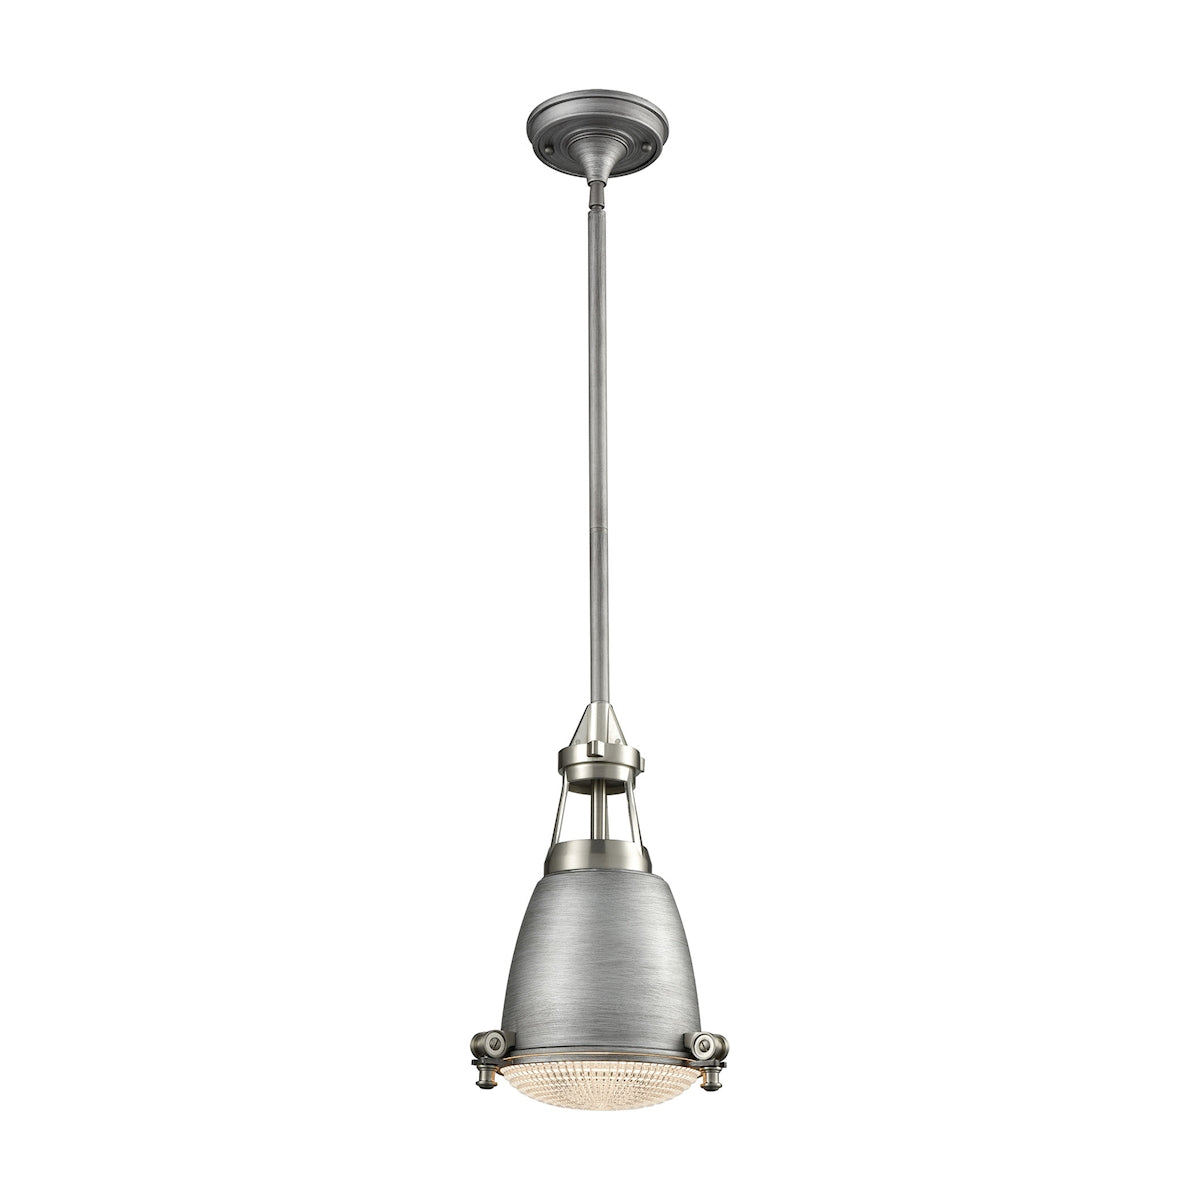 ELK Lighting 65283/1 Sylvester 1-Light Mini Pendant in Satin Nickel and Weathered Zinc with Metal Shade